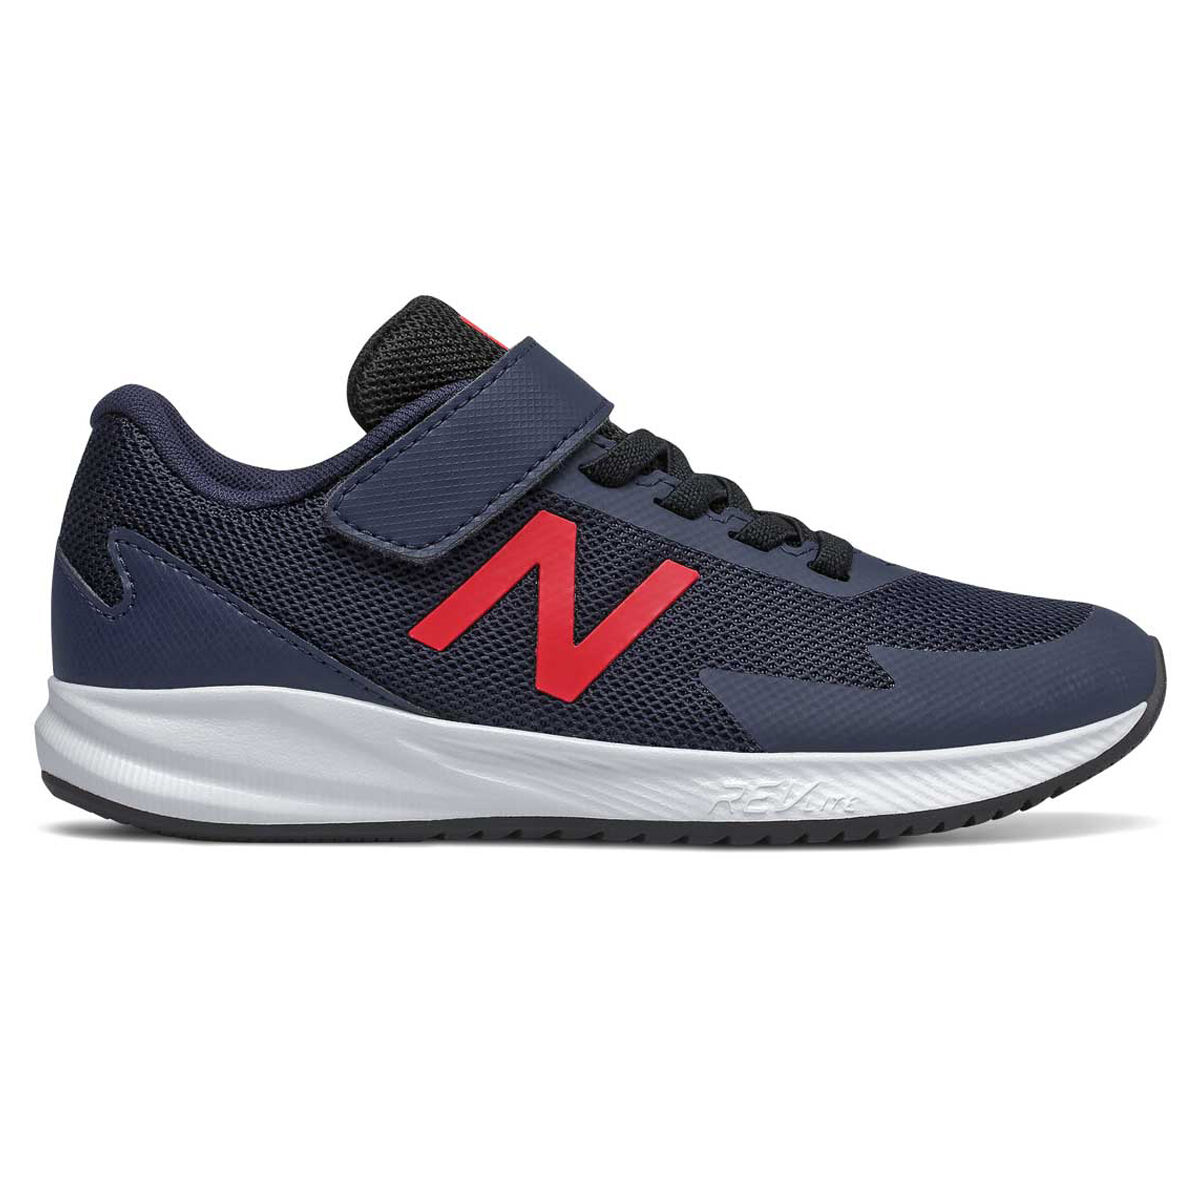 all red new balance shoes